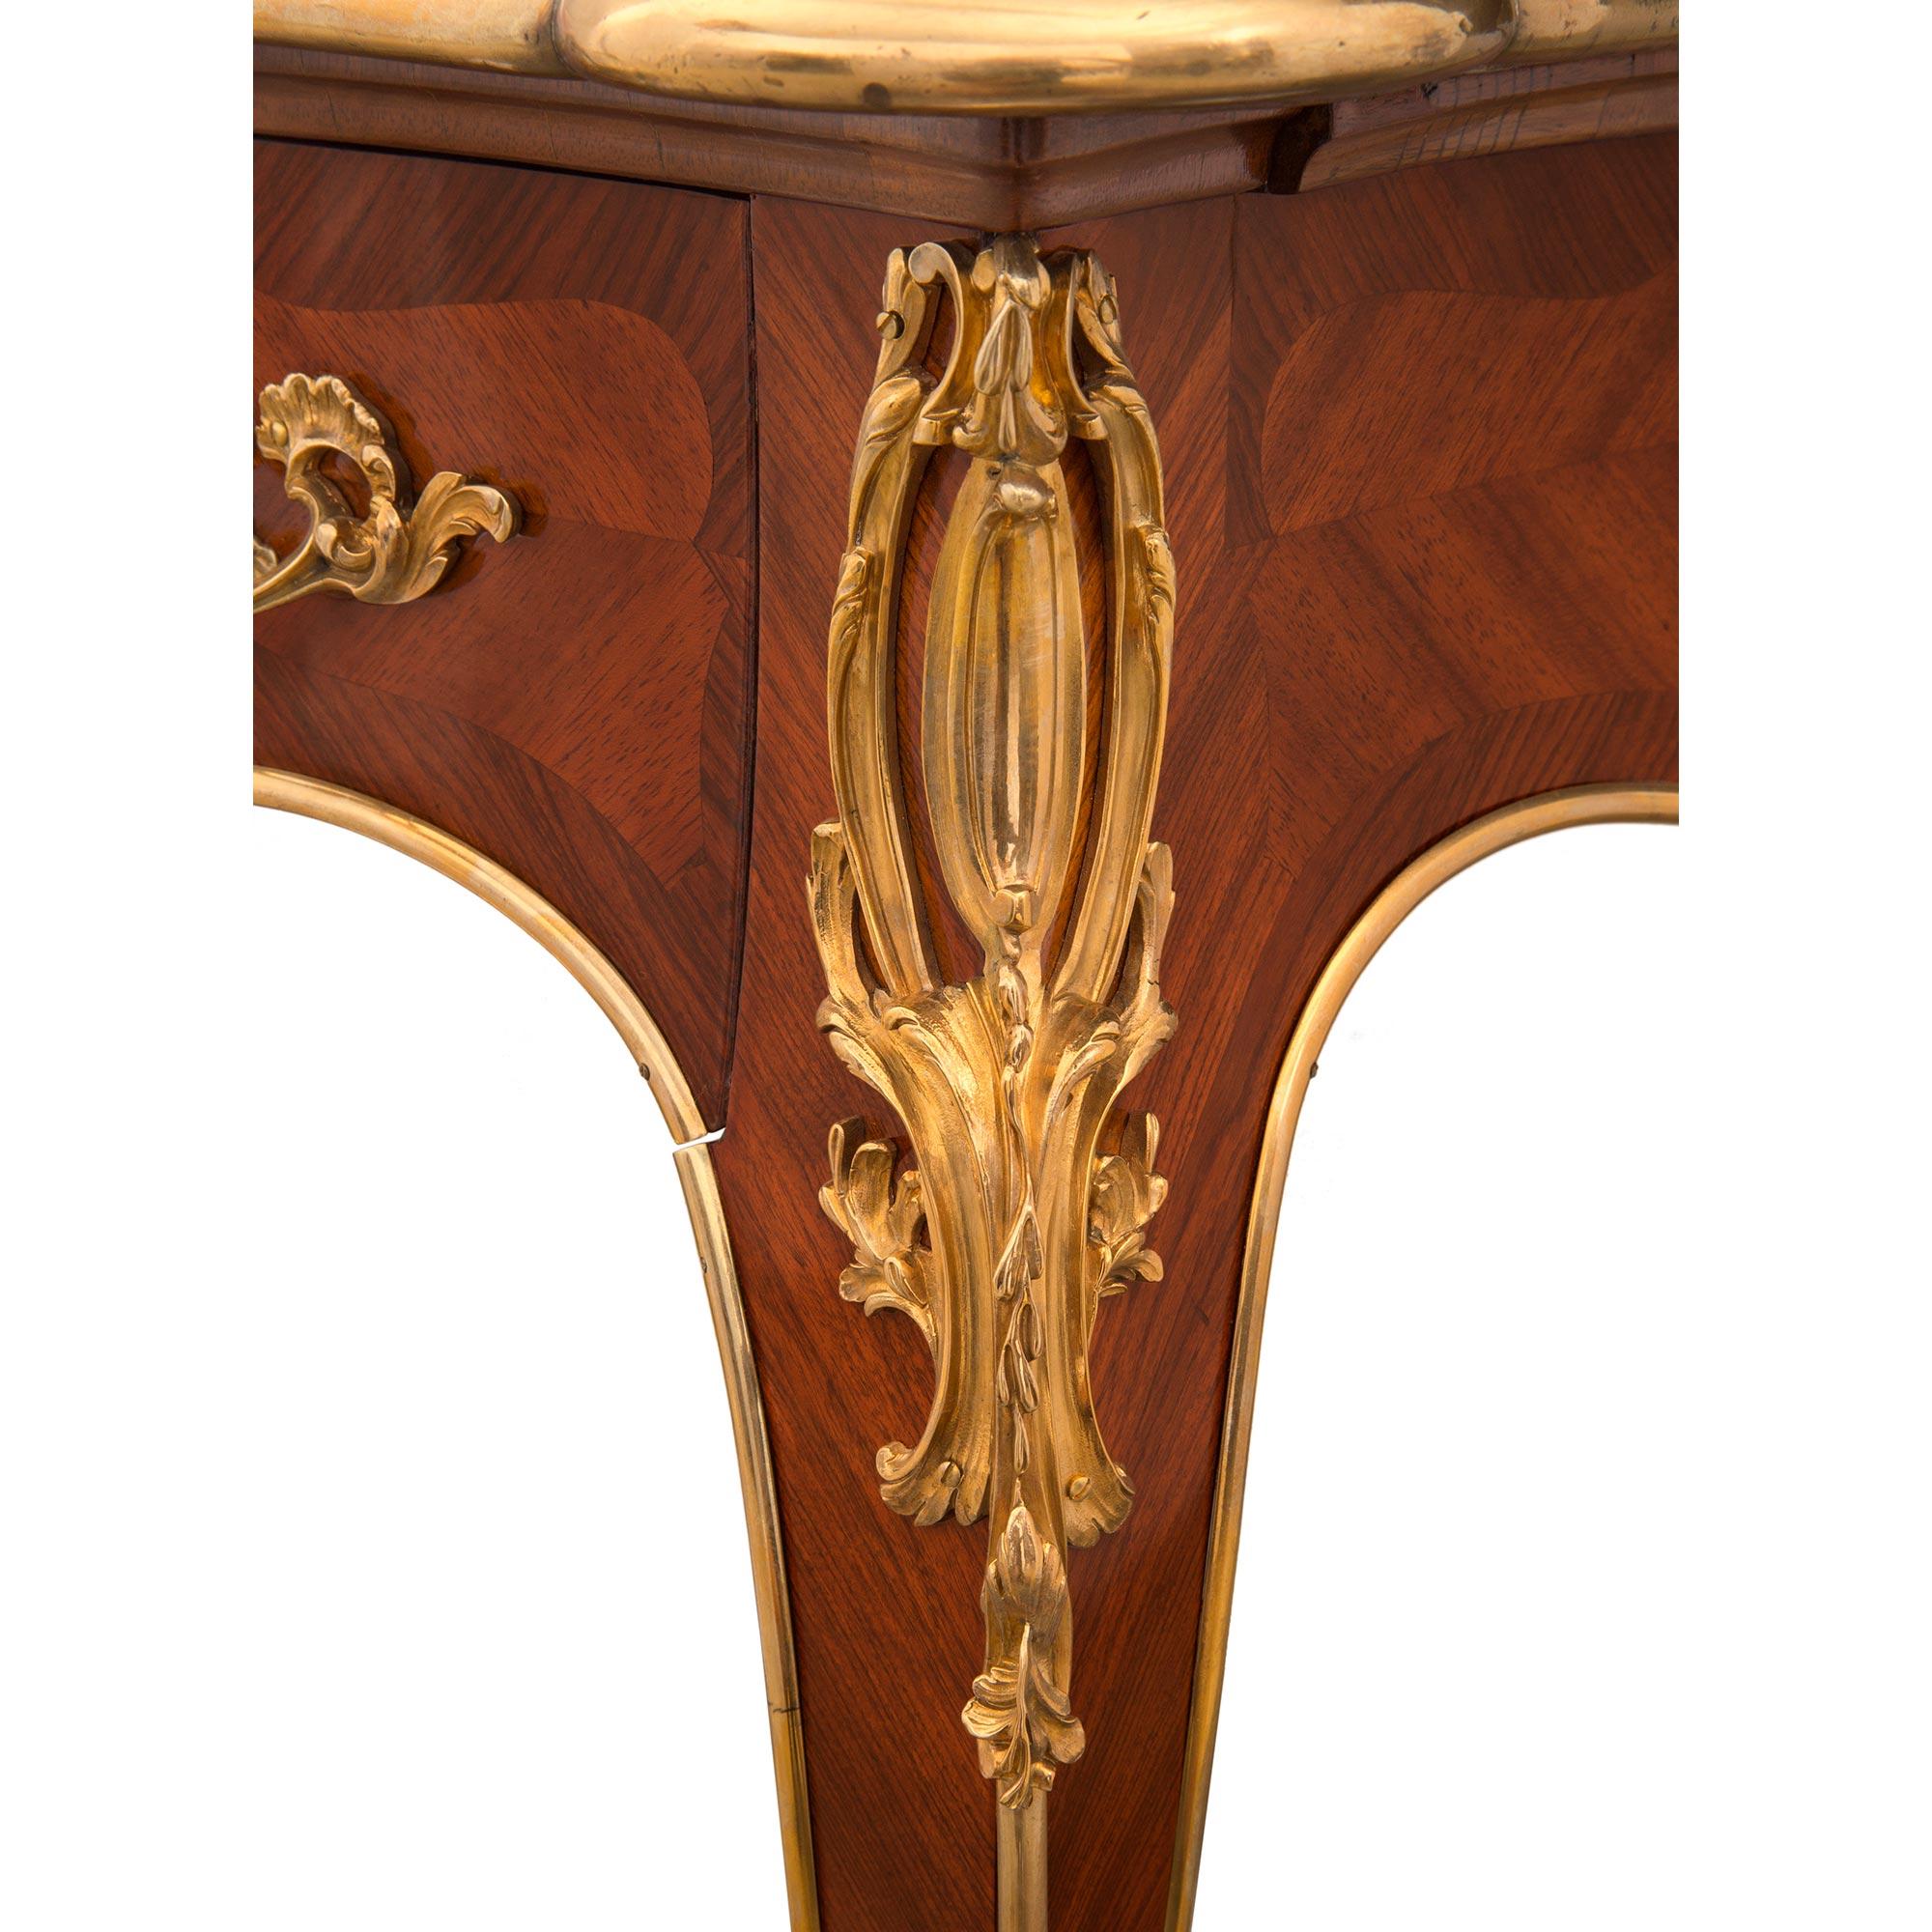 French Mid-19th Century Louis XV Style Kingwood and Ormolu Bureau Plat For Sale 5